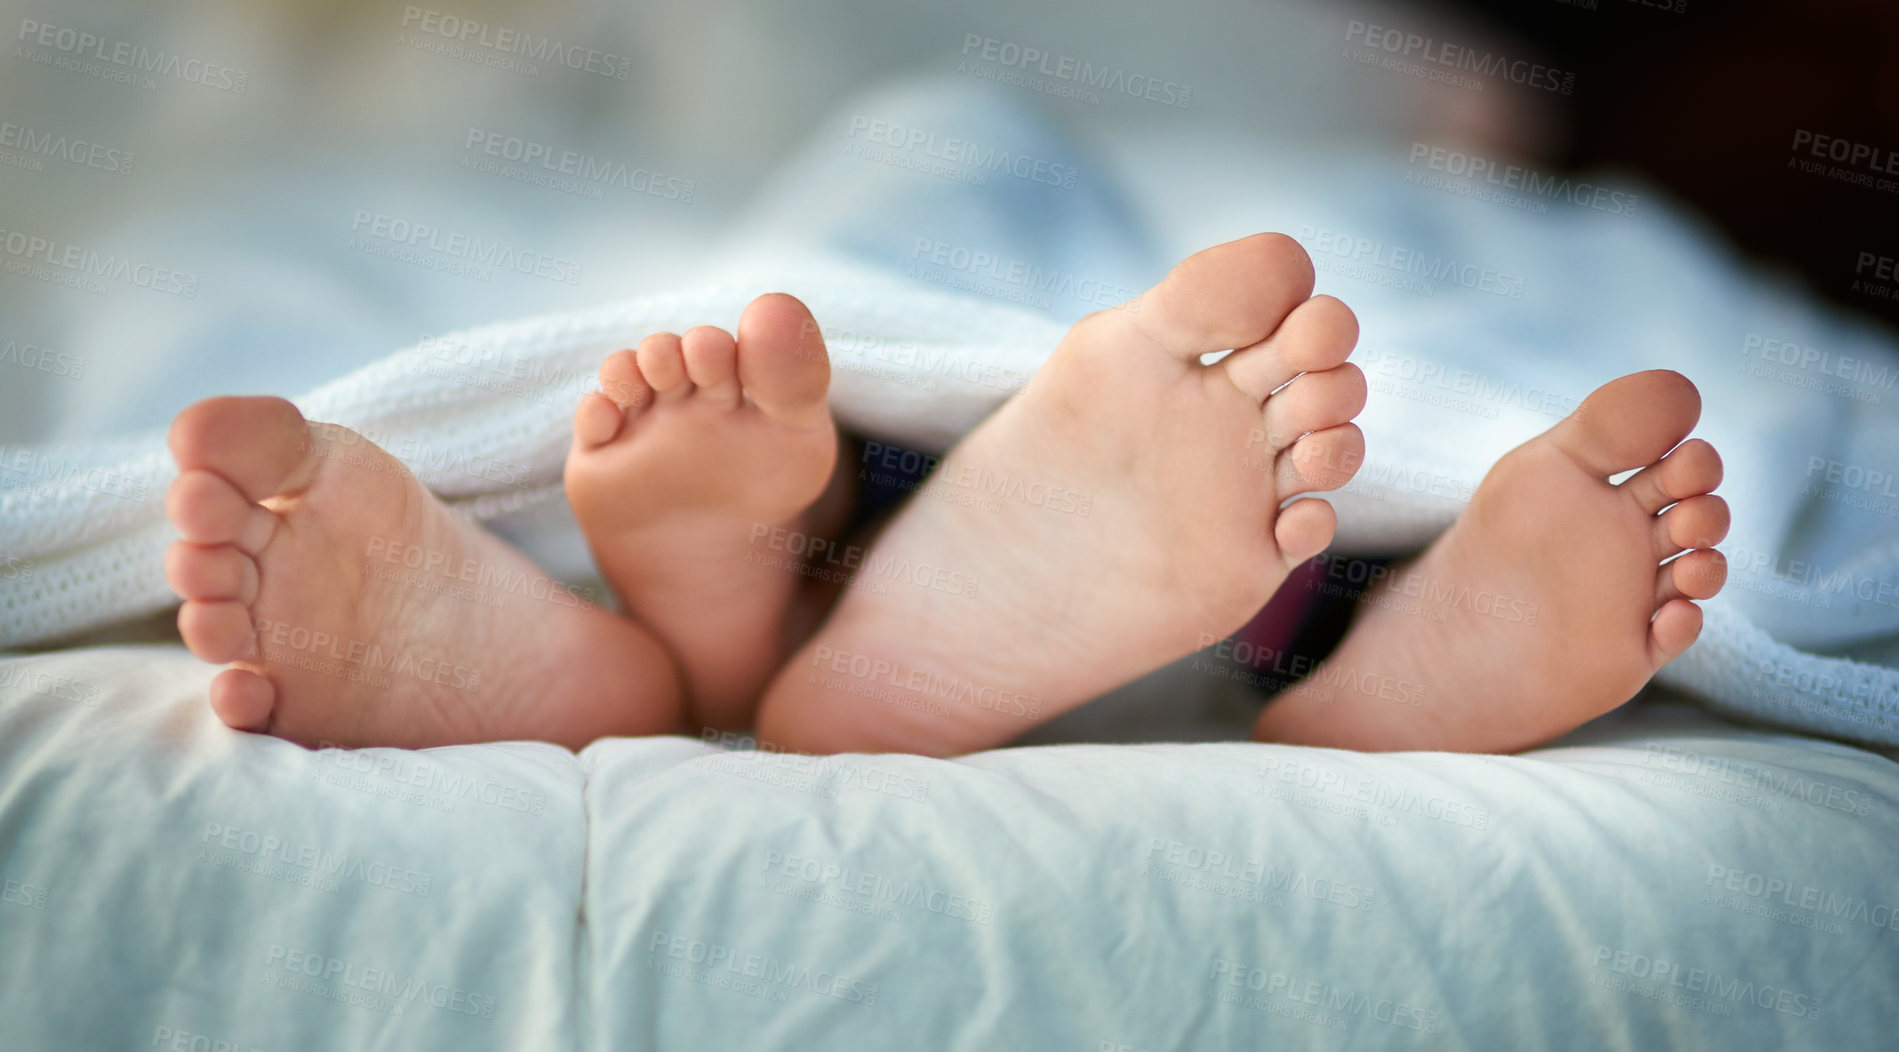 Buy stock photo Cropped shot of a parent and child's feet sticking out under covers